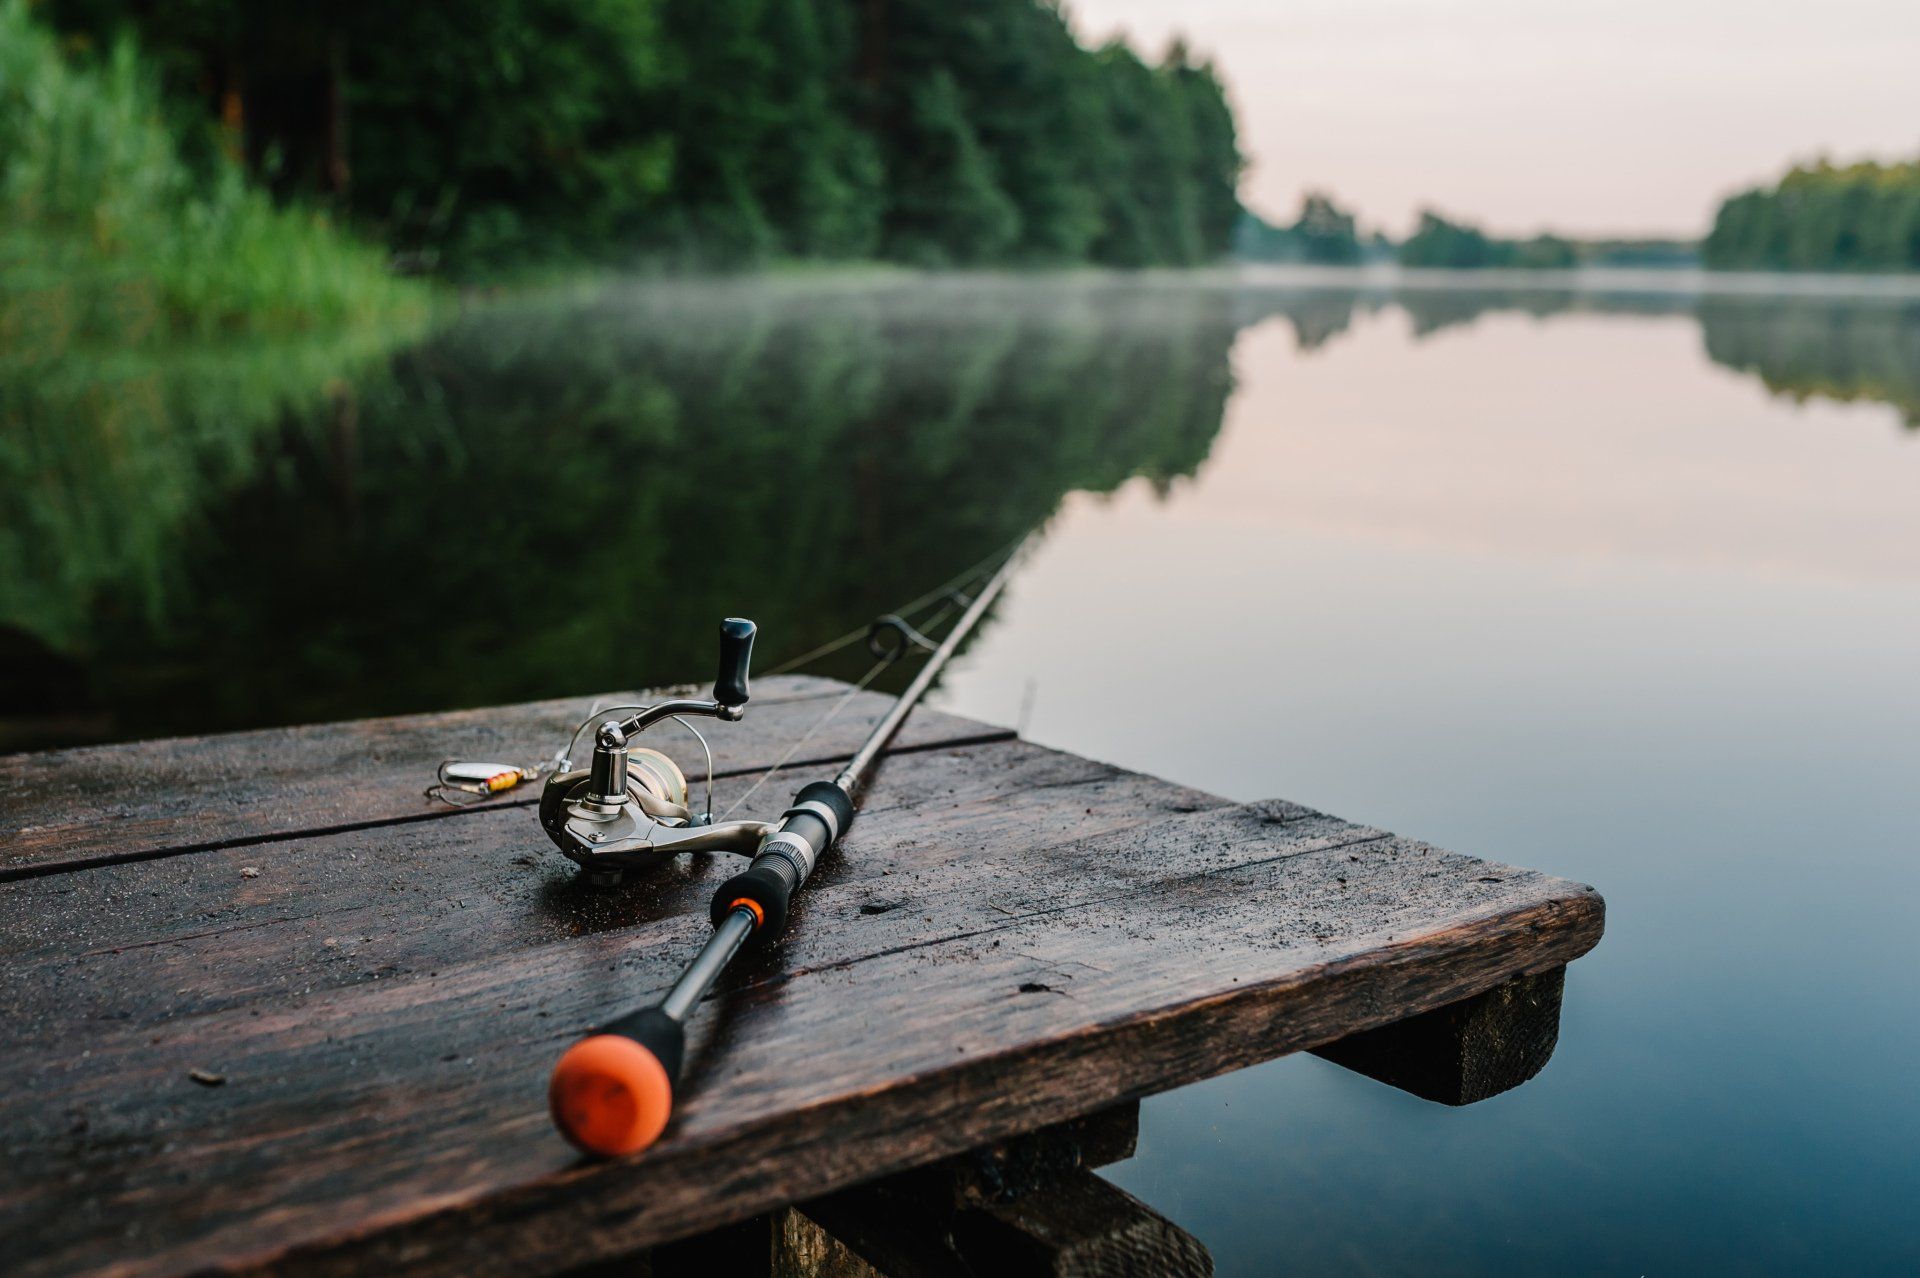 great places to visit if you enjoy fishing